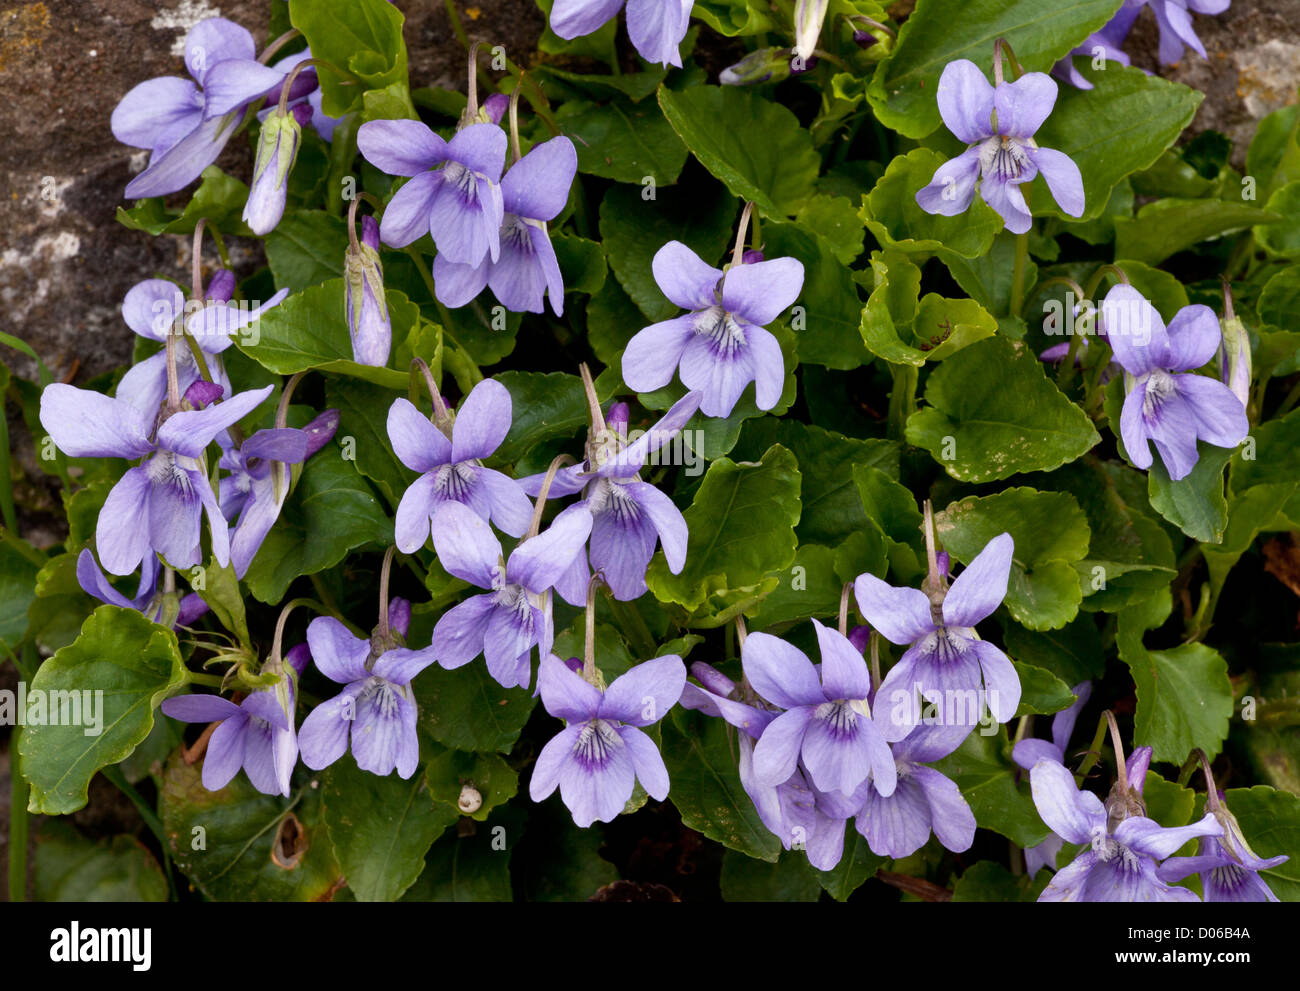 Early dog-violet, Viola reichenbachiana in flower in spring woodland. Stock Photo